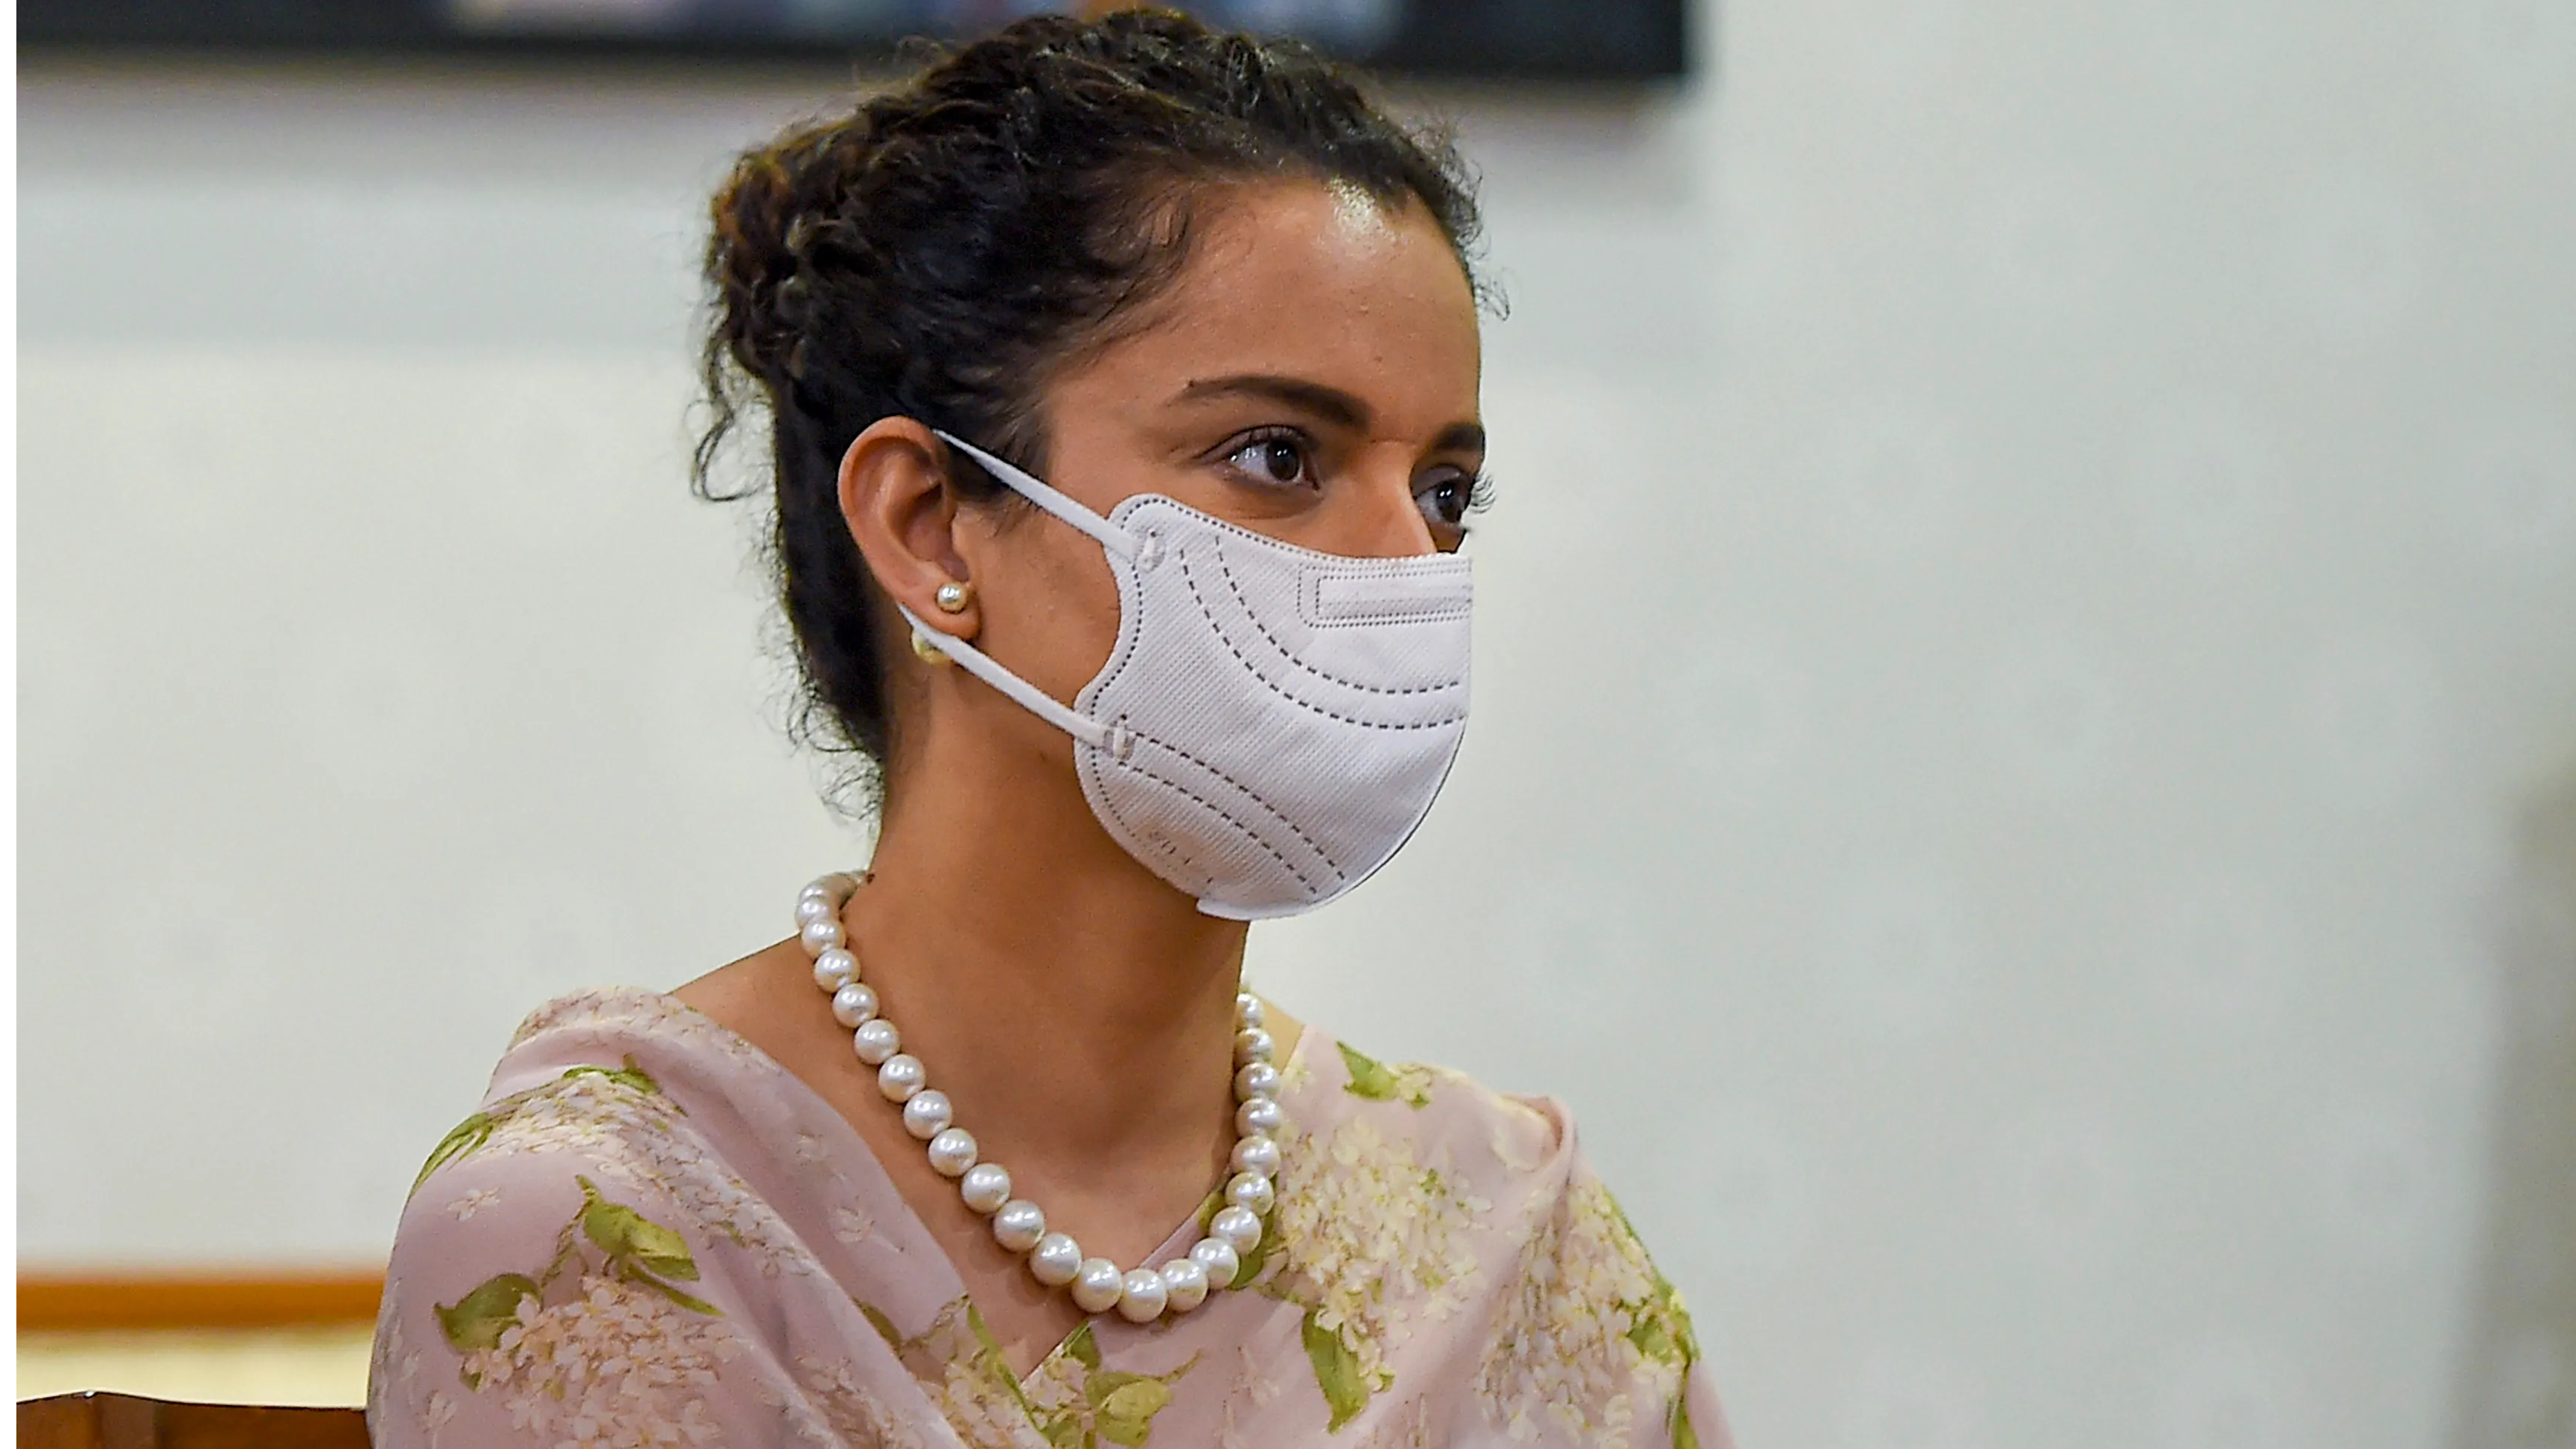 Kangana committed `grave violation of plan’ while merging her flats: Court